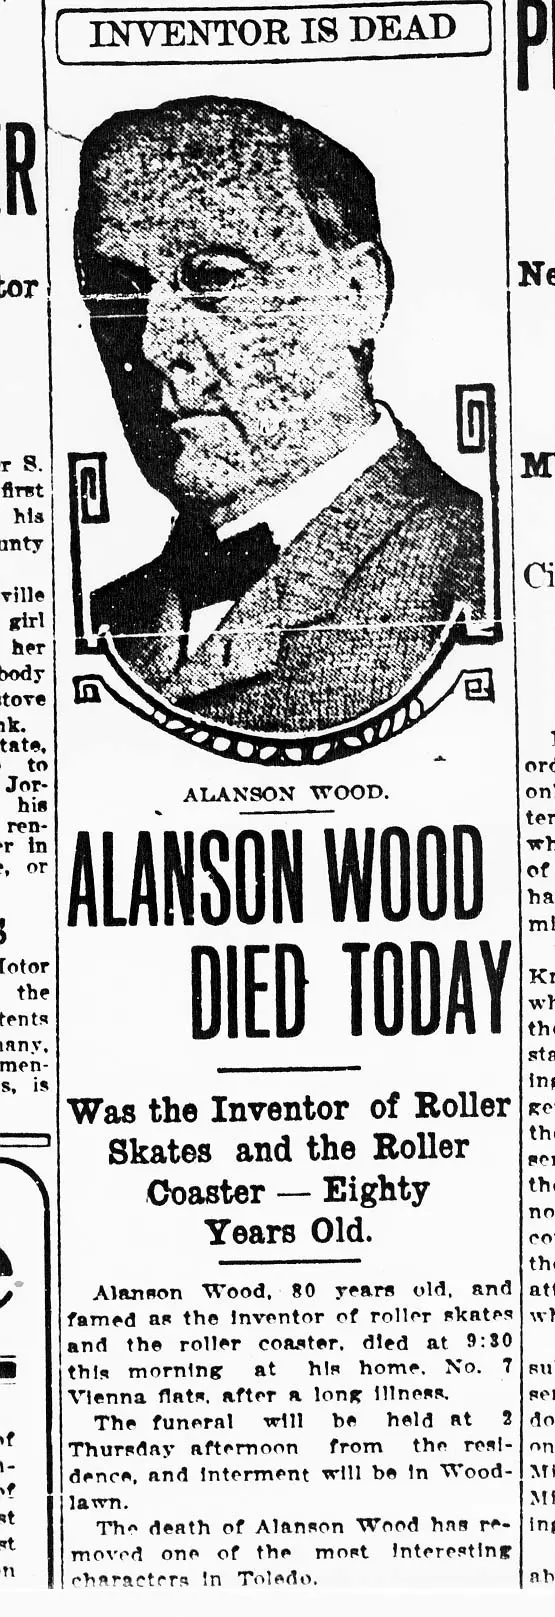 Wood's Obituary from the Toledo Blade, May 4, 1909, page 1